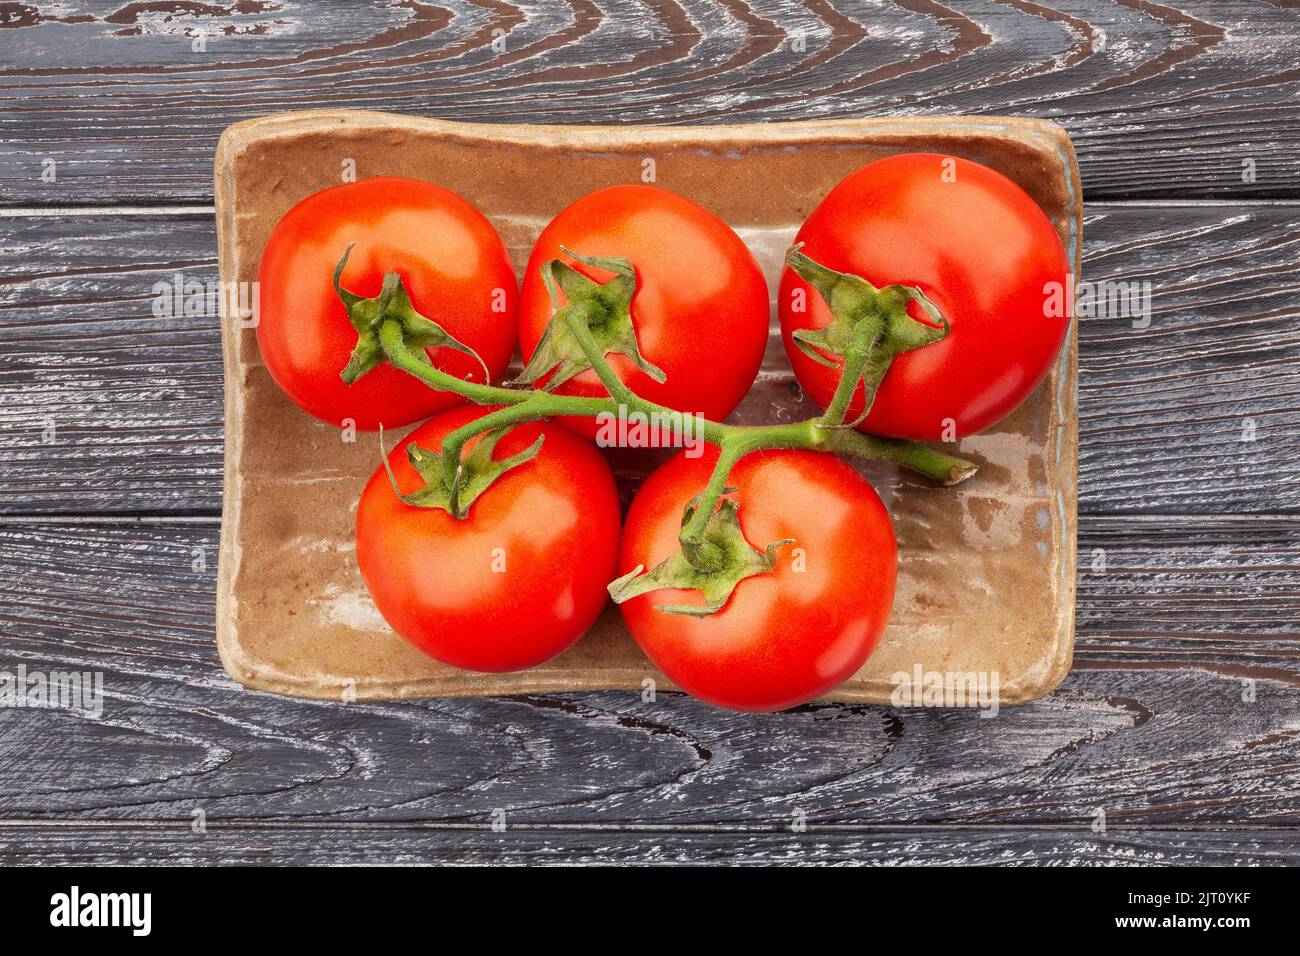 tomato on a plate on wood background Stock Photo